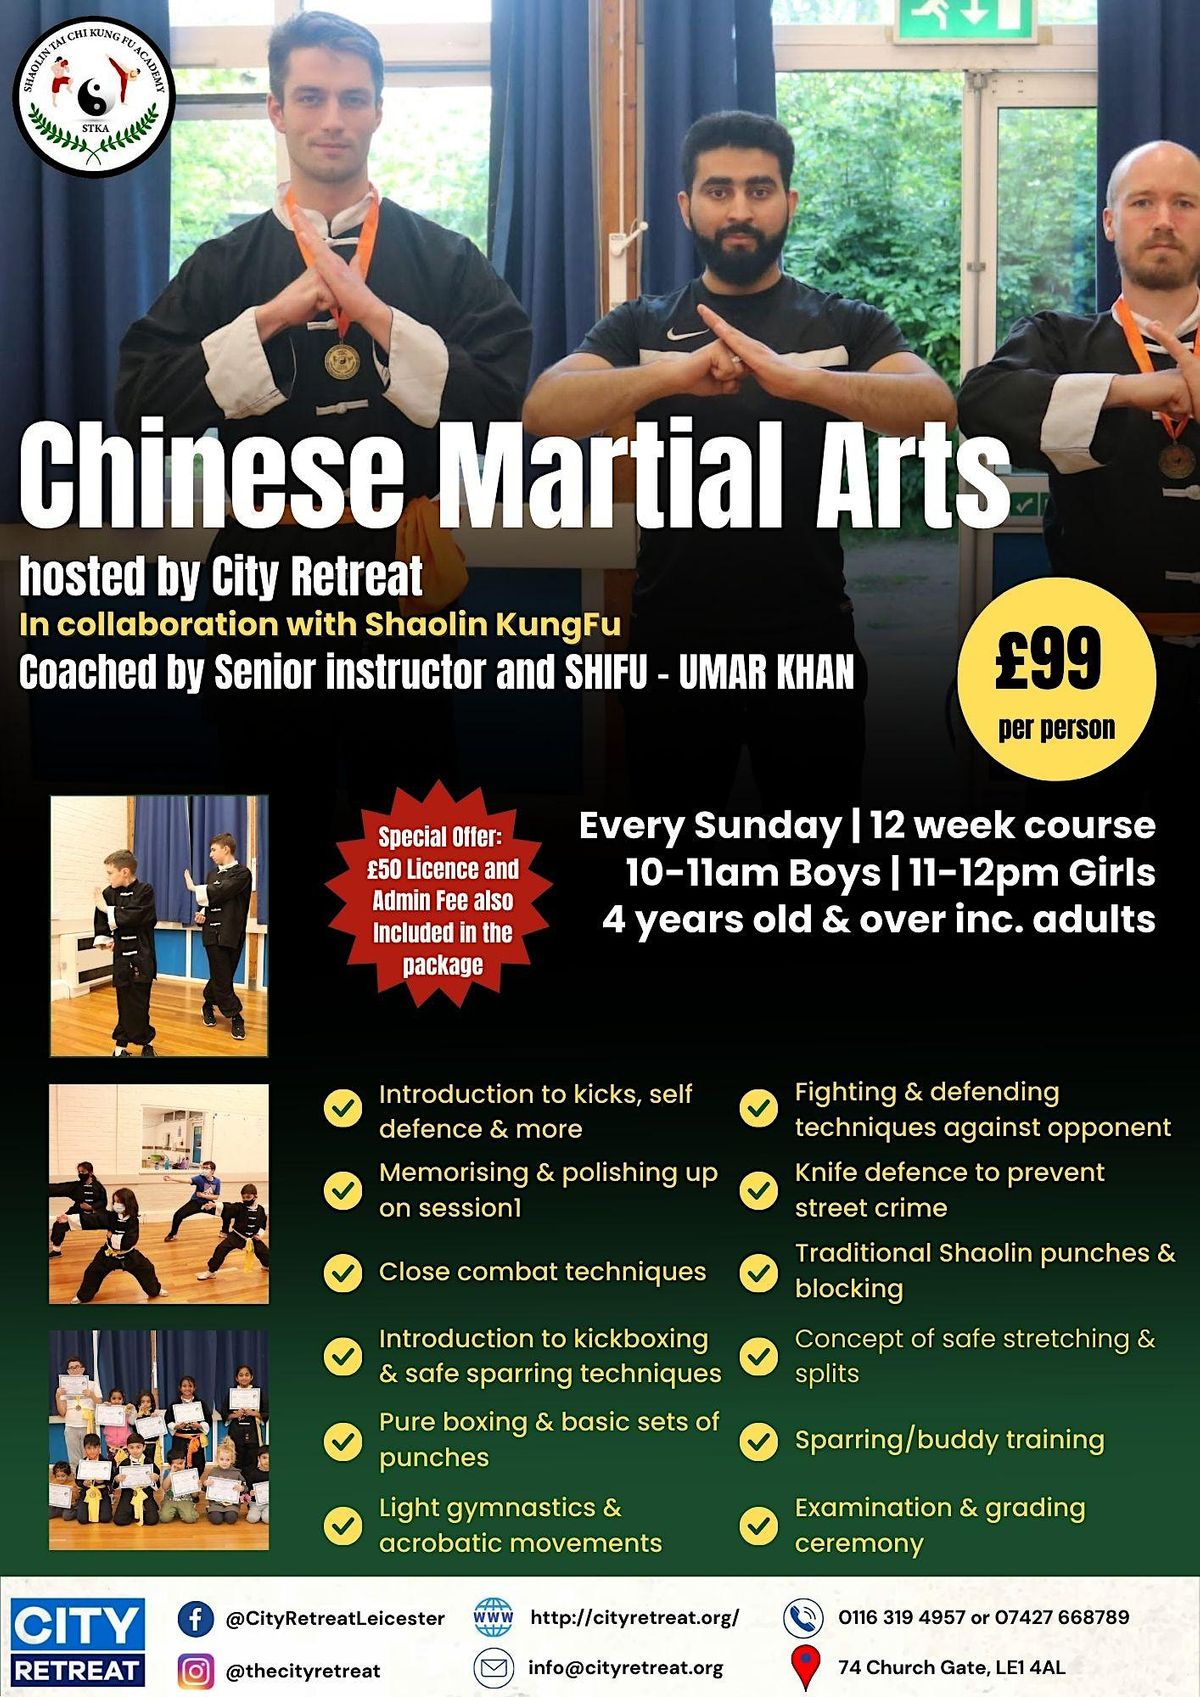 Chinese Martial Arts hosted by City Retreat